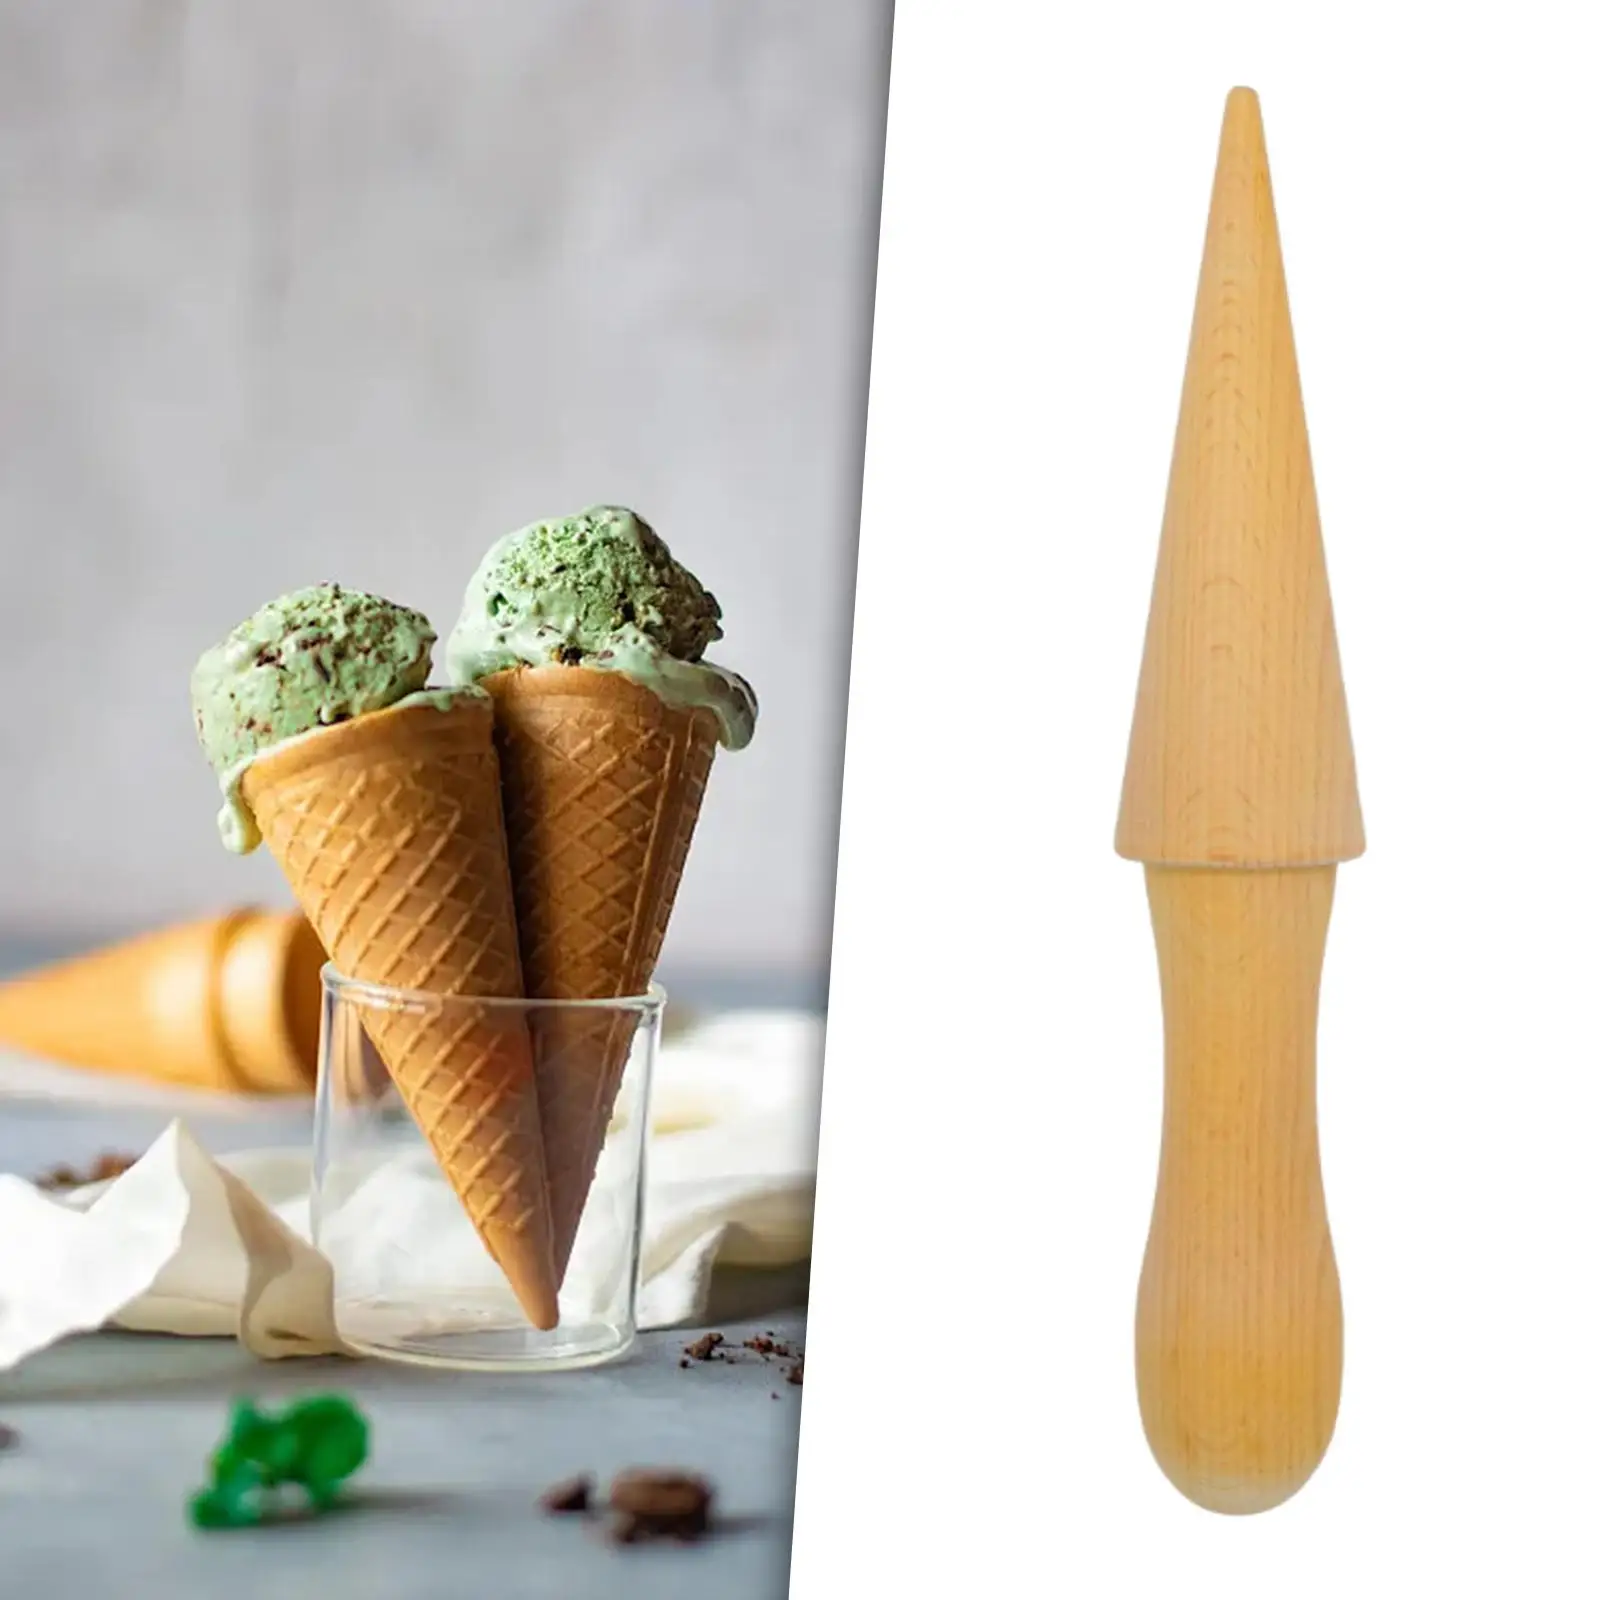 Wooden Ice Cream Cone Maker Dessert Cooking DIY Tools Lightweight Kitchen Tool Pizzelle Roller for Baking Kitchen Pastry Cooking